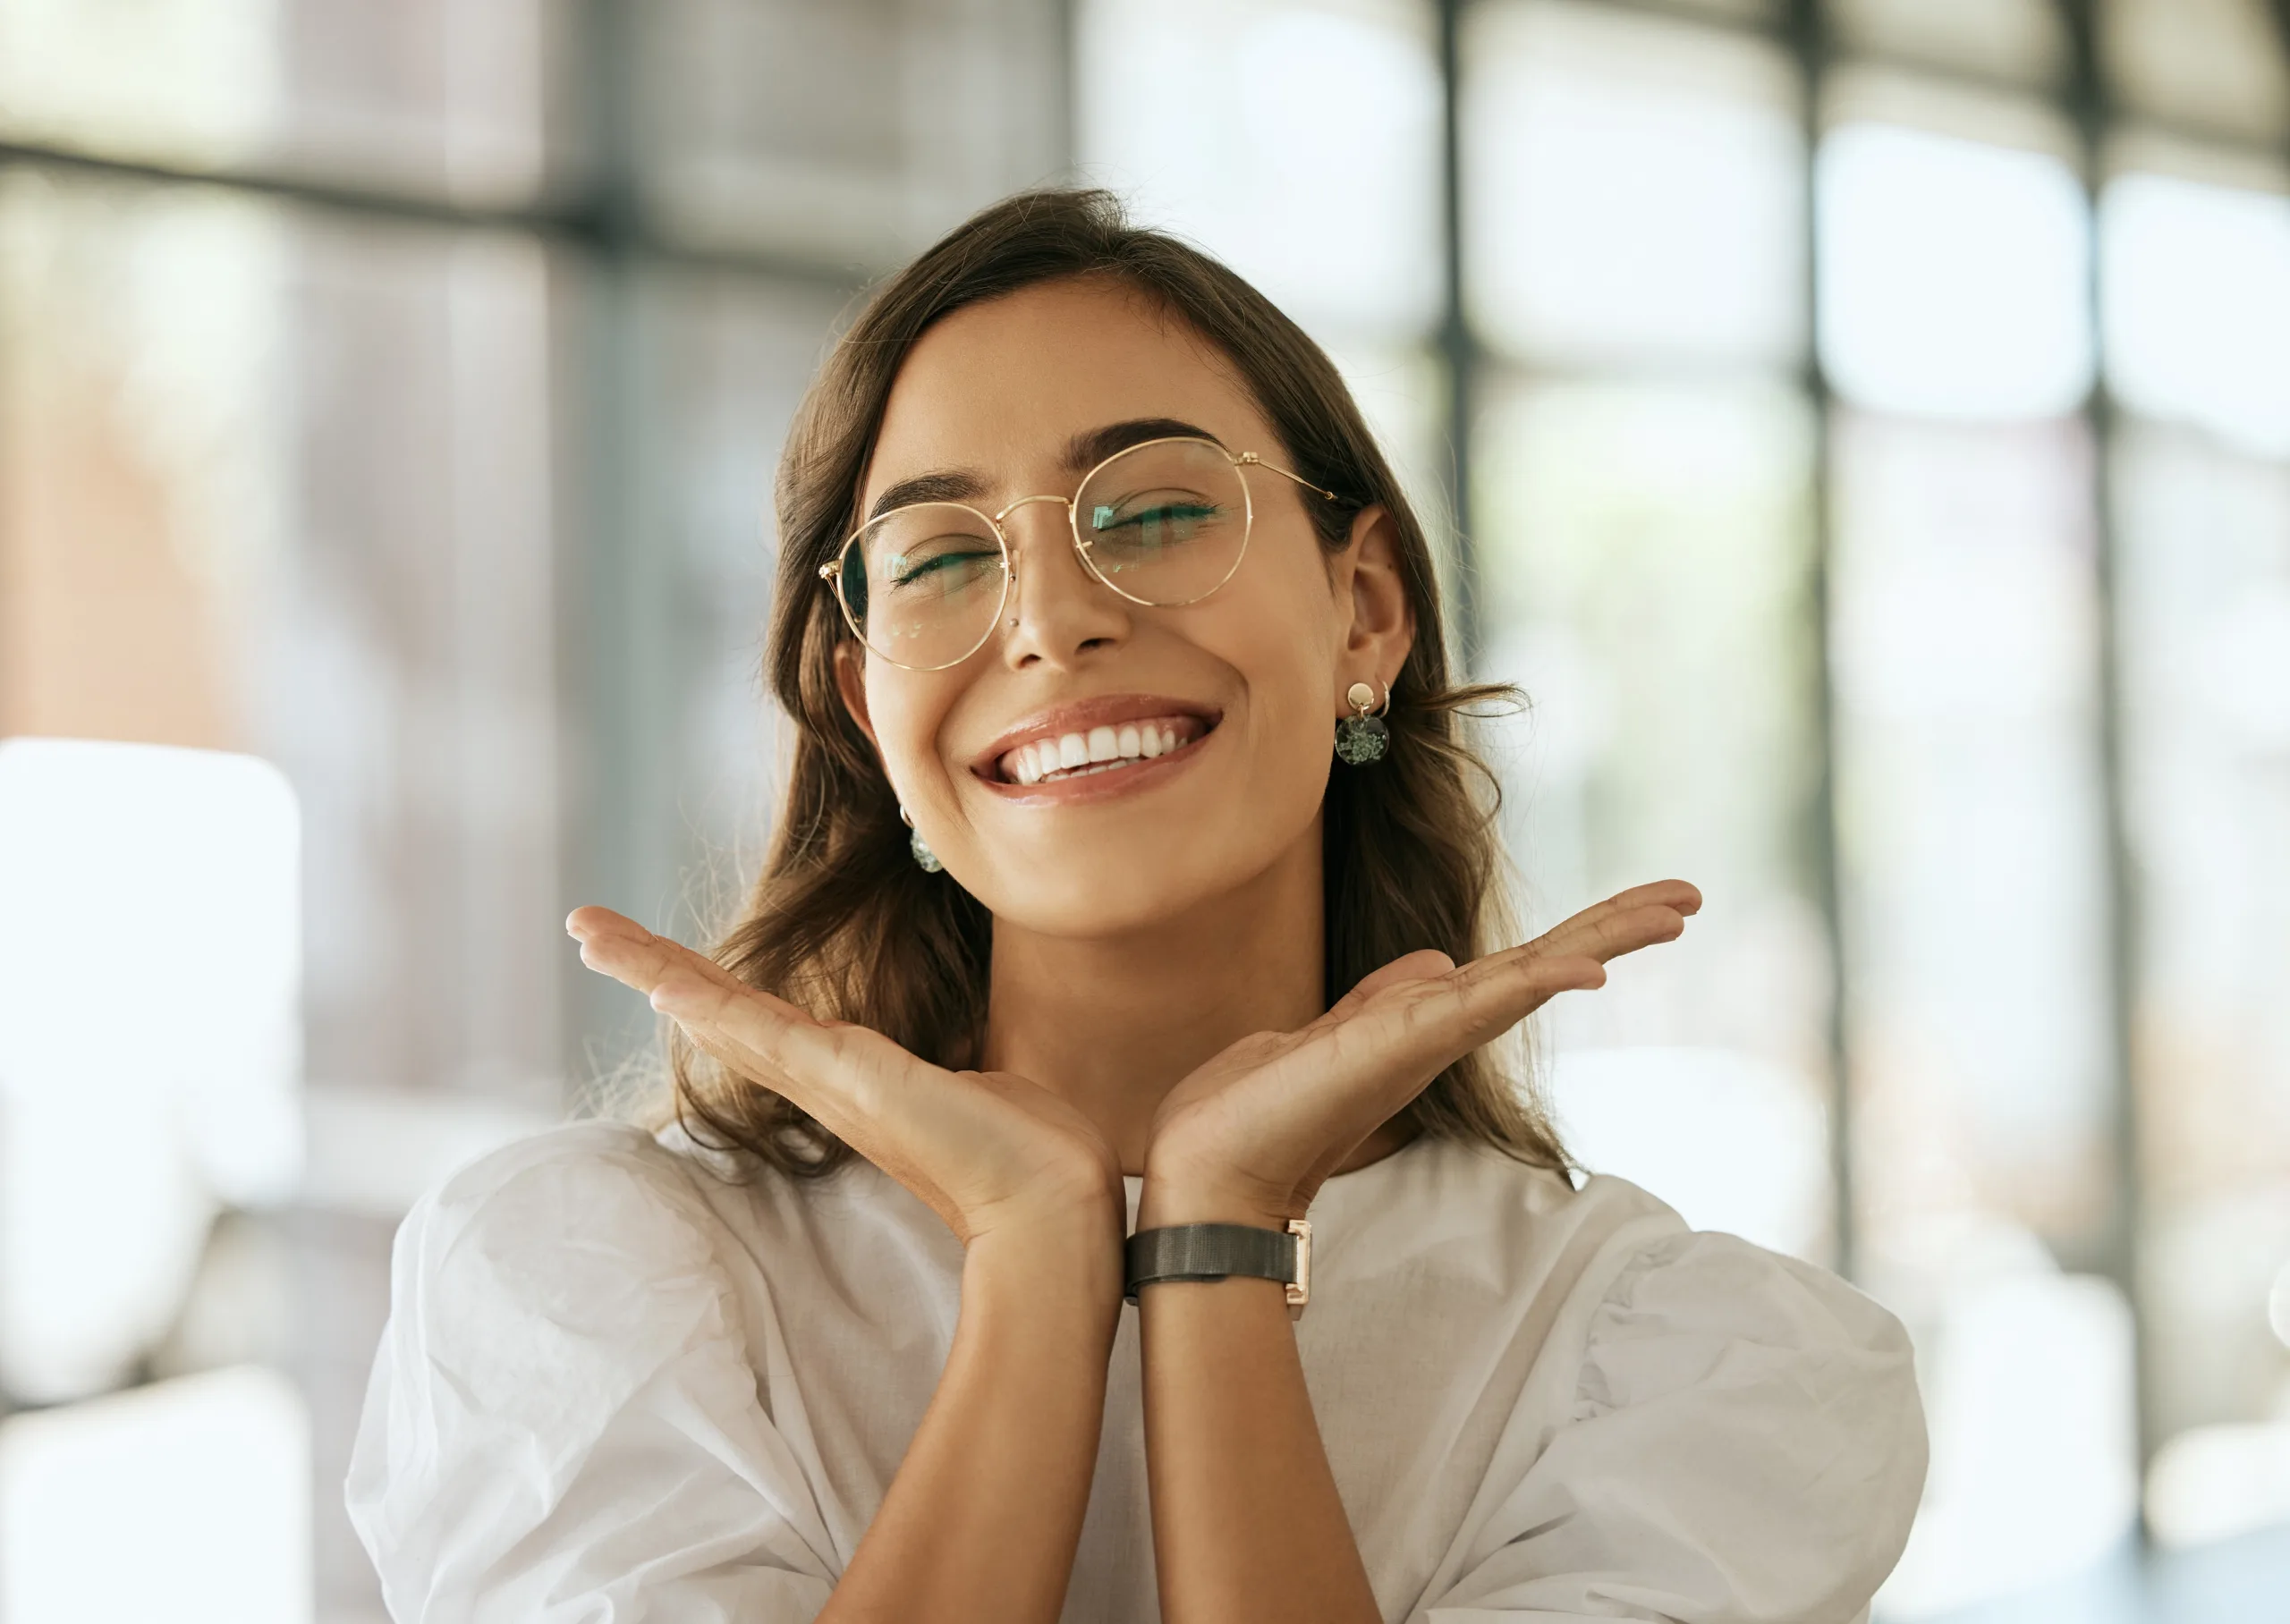 Adult women radiant about her glasses and vision